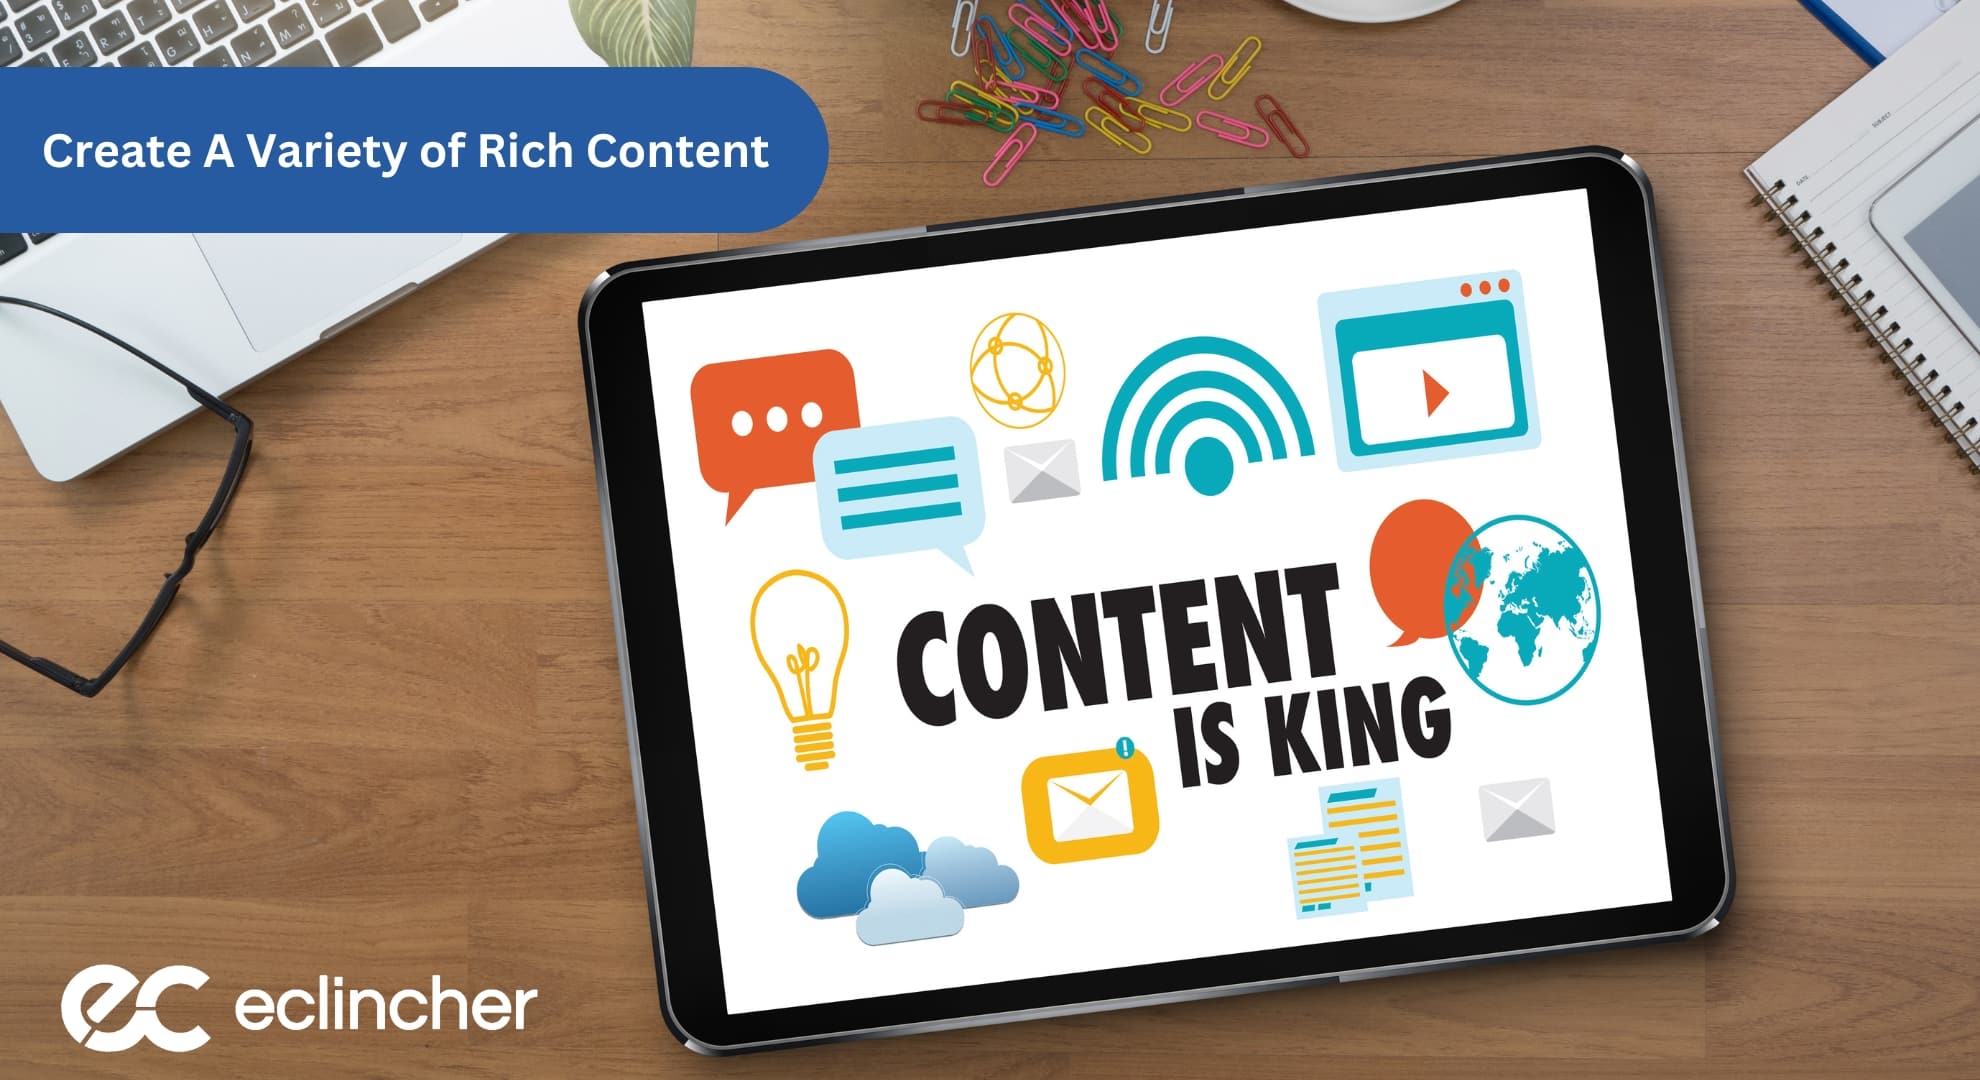 Create A Variety of Rich Content